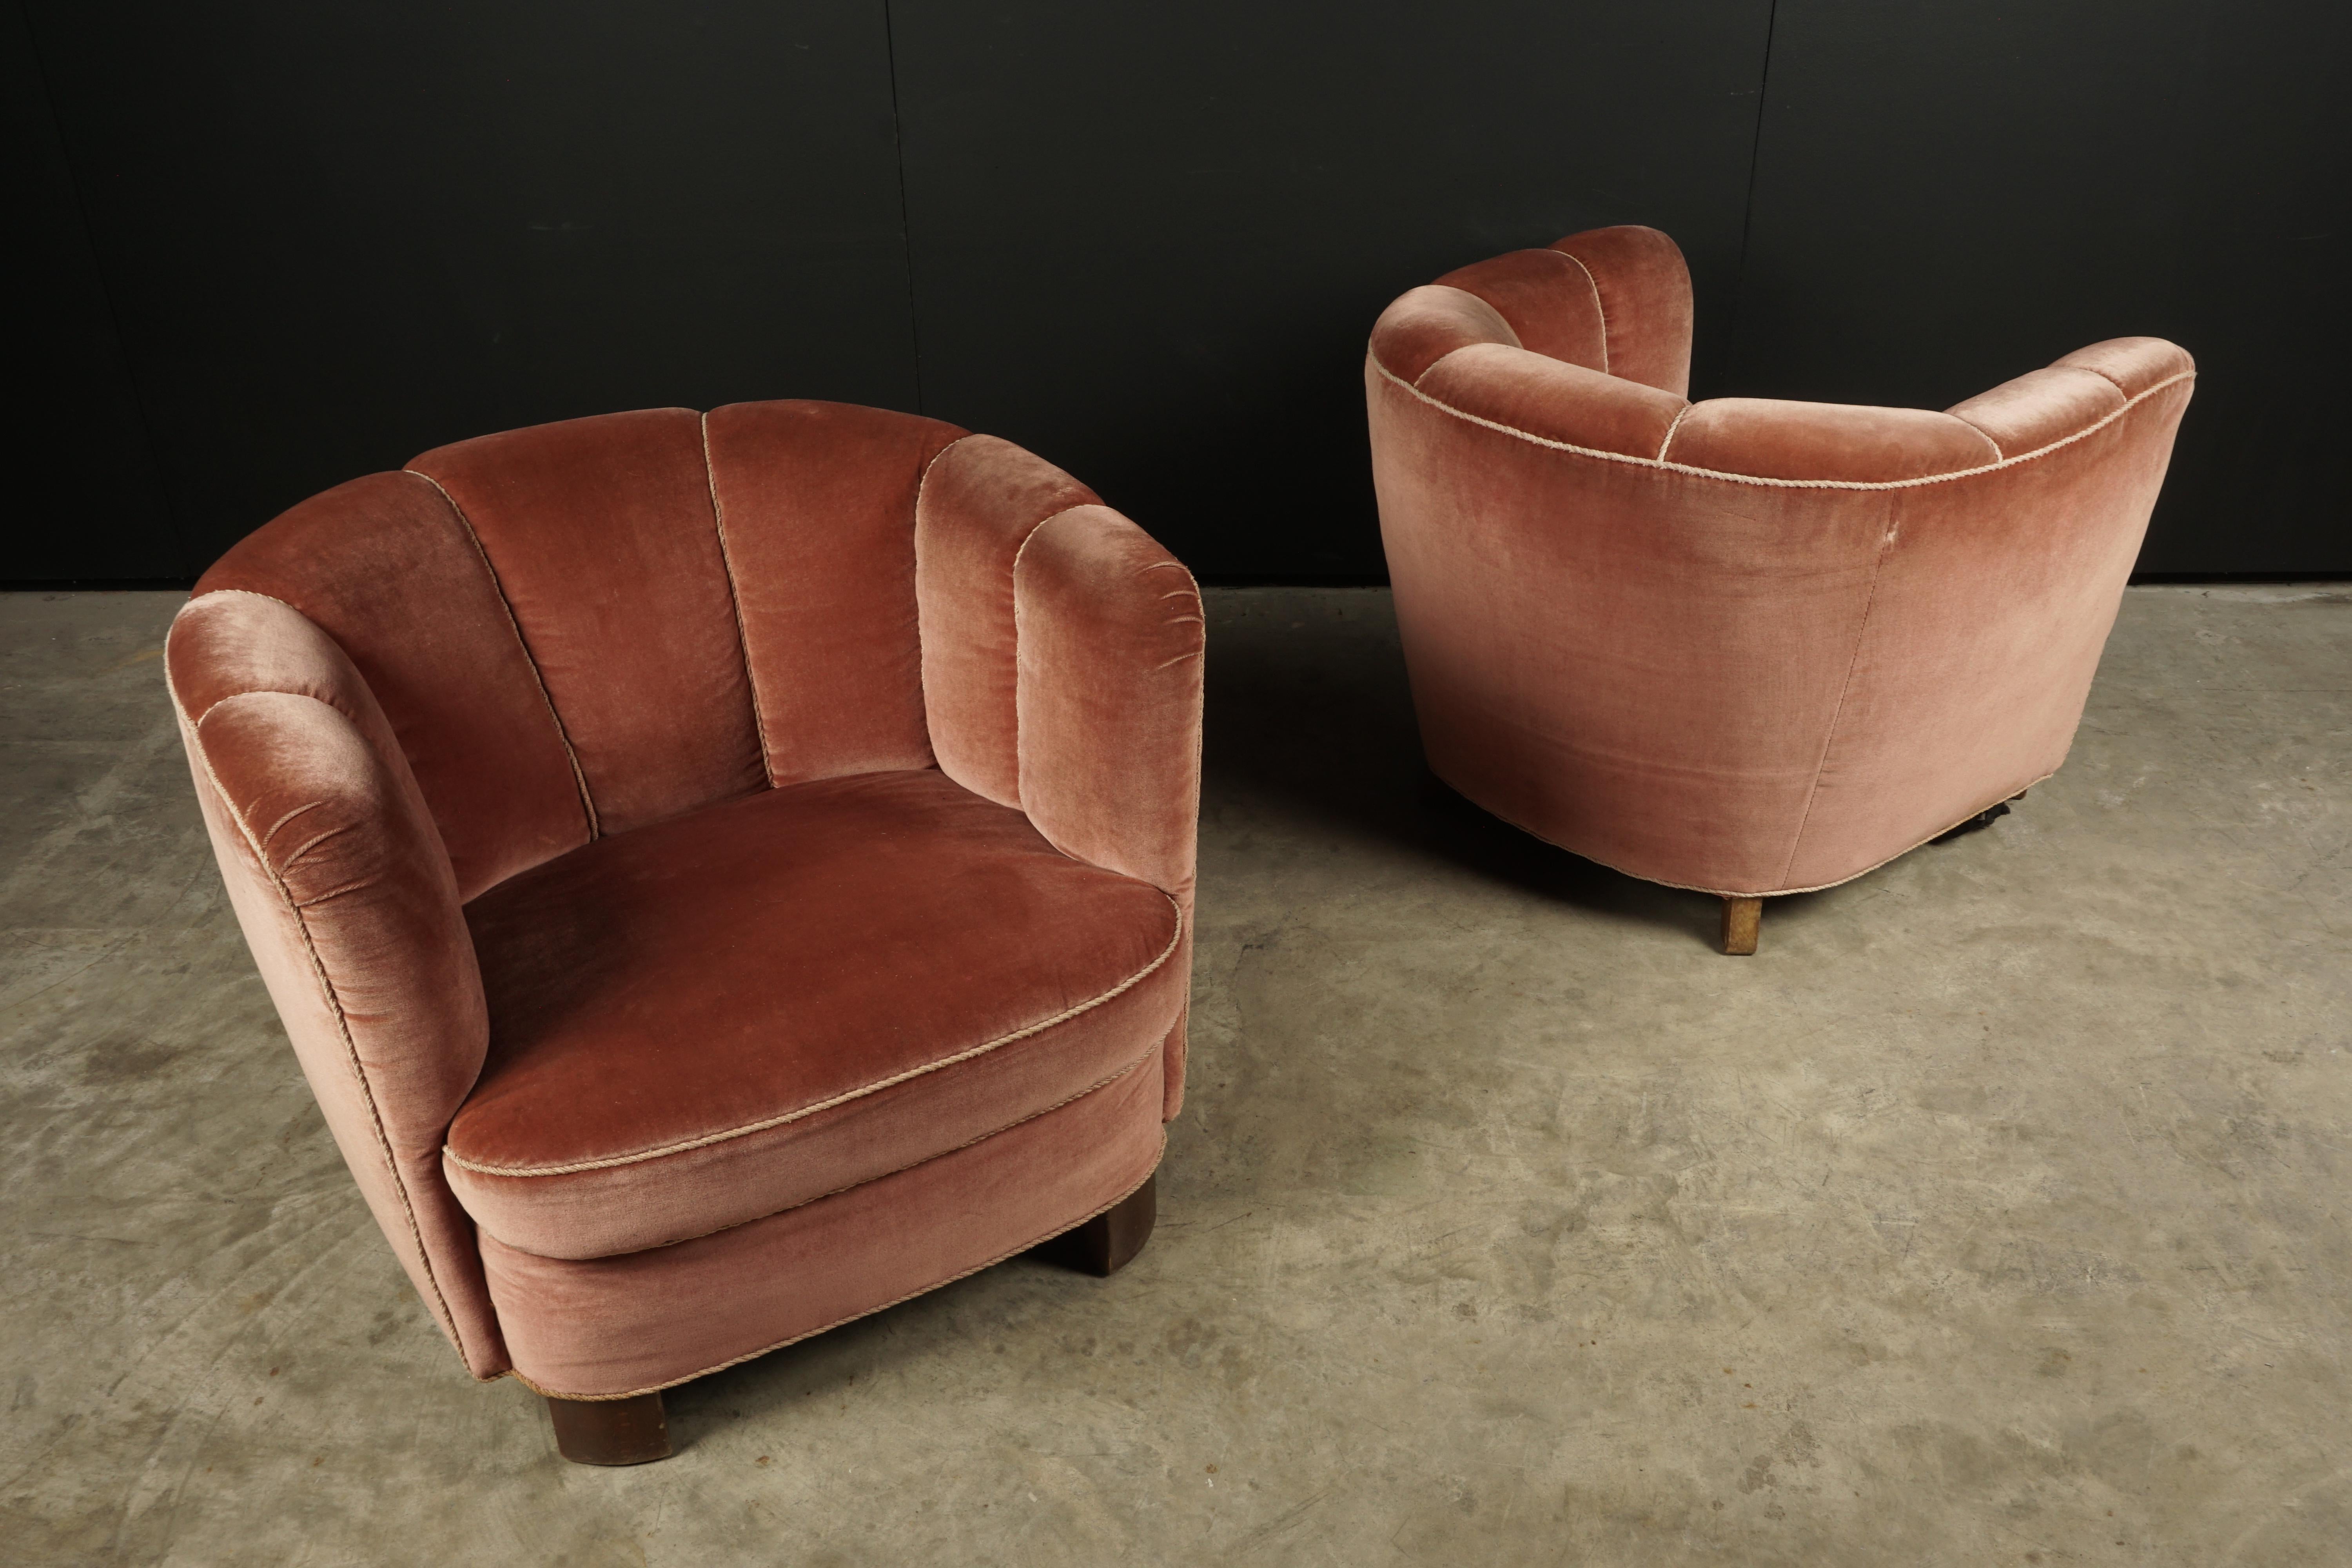 Vintage pair of Art Deco lounge chairs from Denmark, circa 1950. Large, comfortable model with rose colored velvet upholstery.